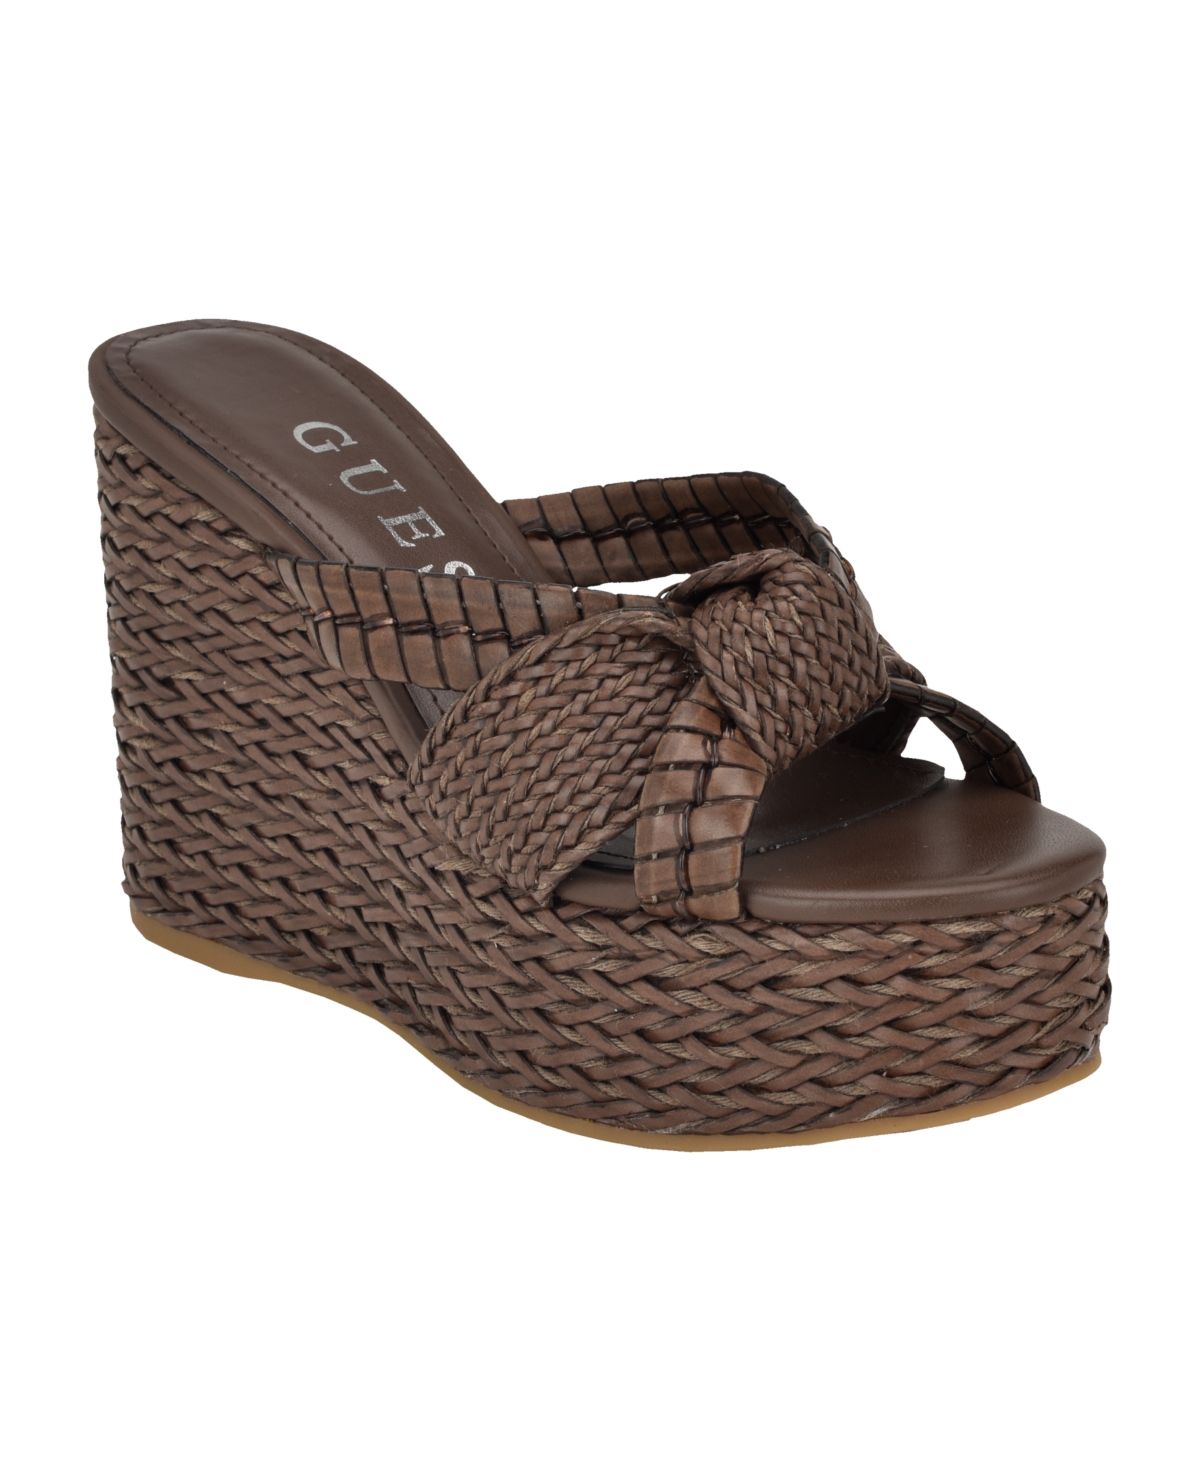 GUESS WOMEN'S EVEH KNOTTED JUTE WRAPPED PLATFORM WEDGE SANDALS